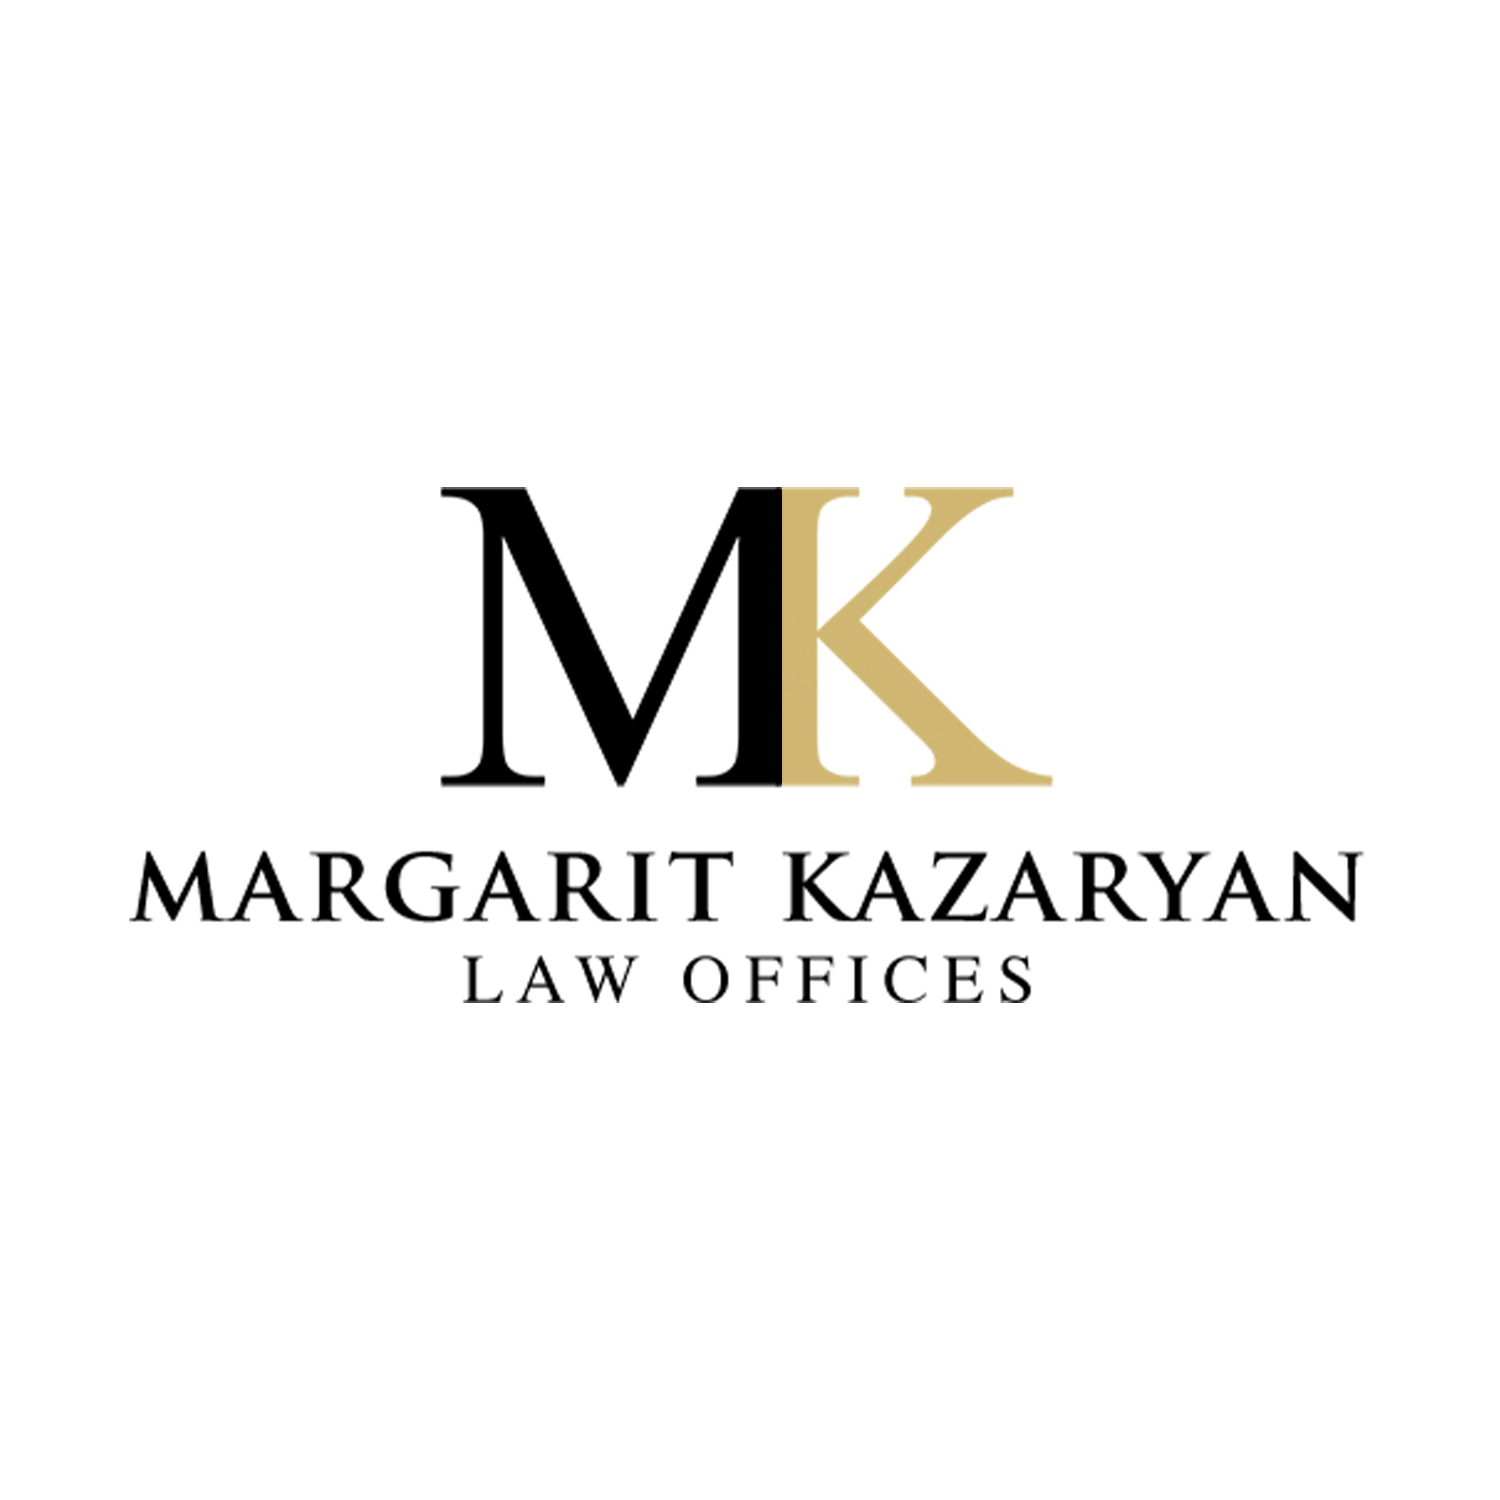 MK Law Offices Logo - The US Armenians